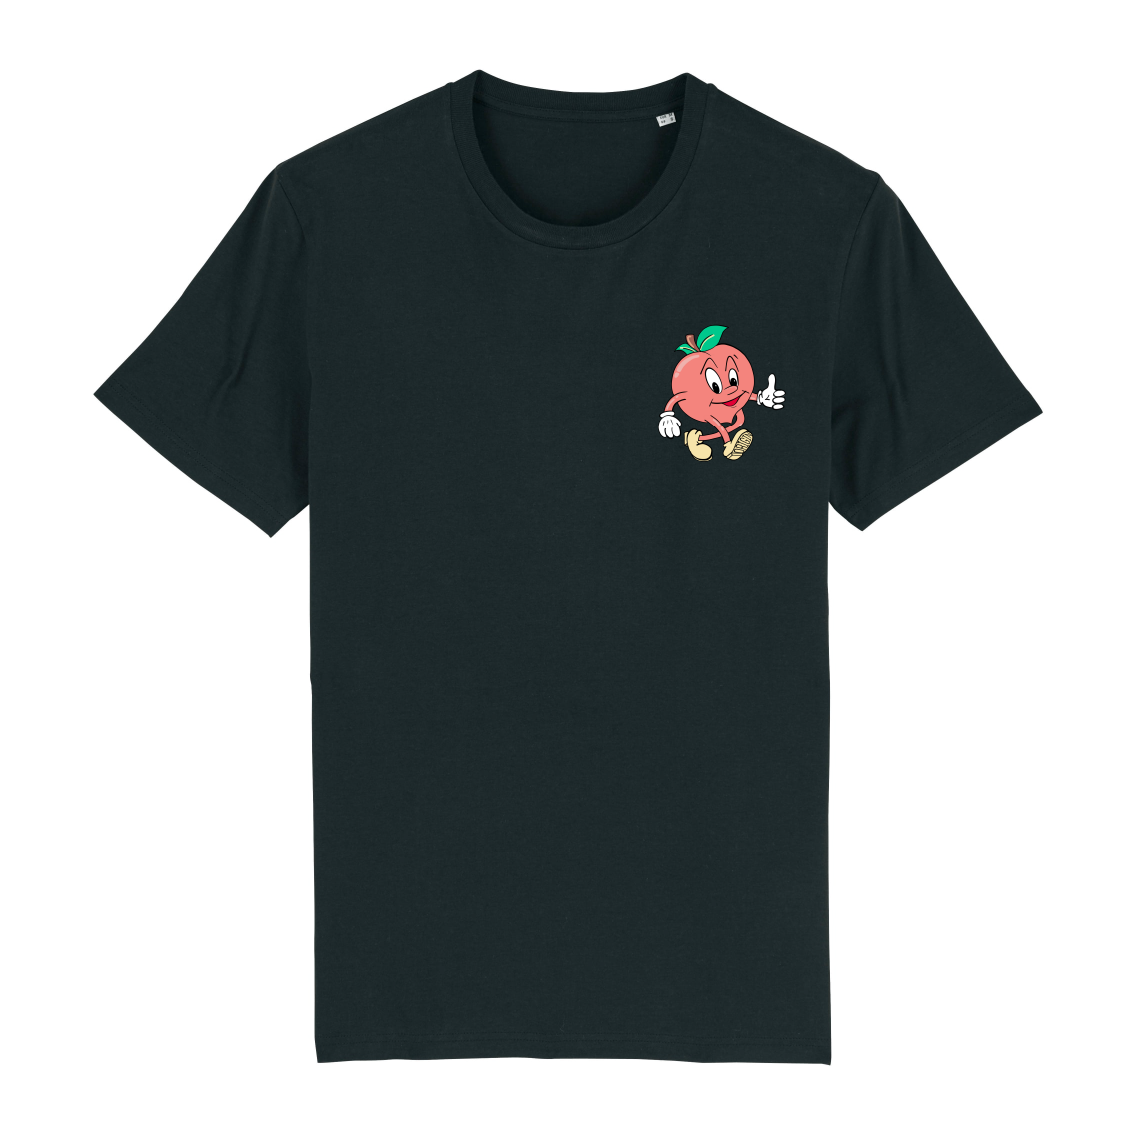 Peaches & Cleans Classic Fit Tee